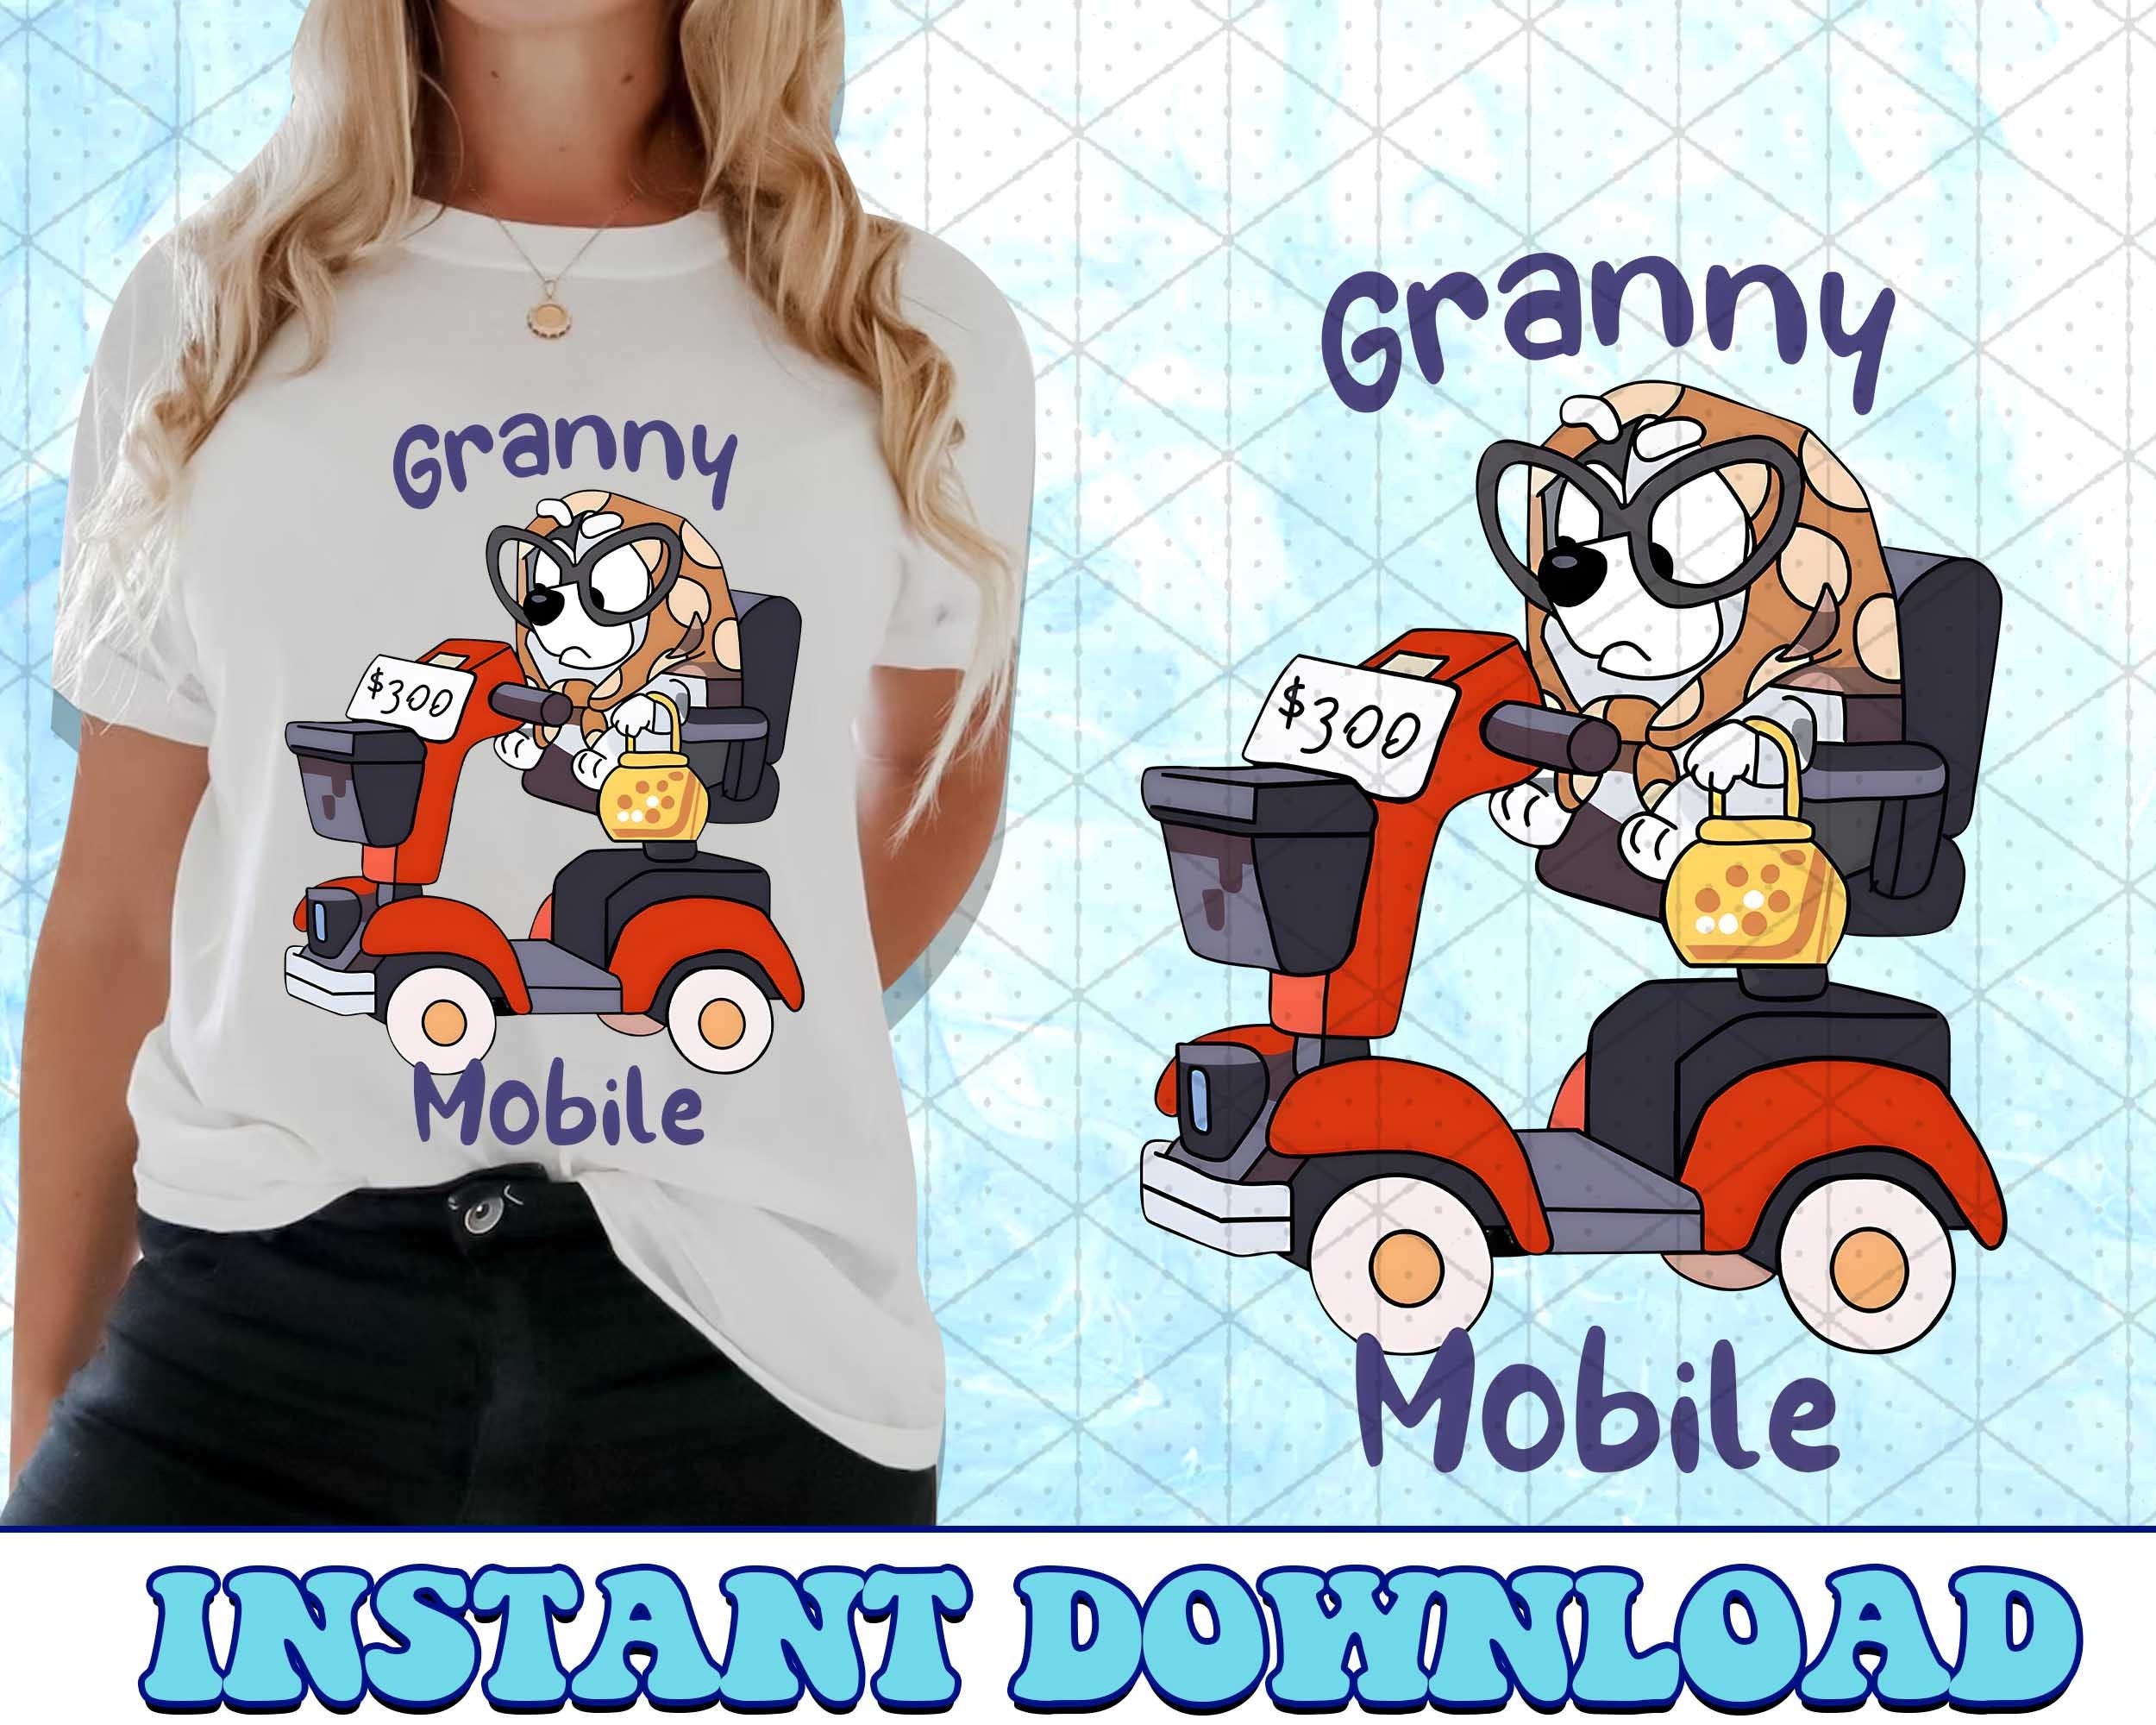 Granny Mobile Bluey PNG, Bluey Family PNG, Bluey The Eras Tour Png, Bluey Bingo Png, Bluey Mom Png, Bluey Dad Png, Bluey Friends Png